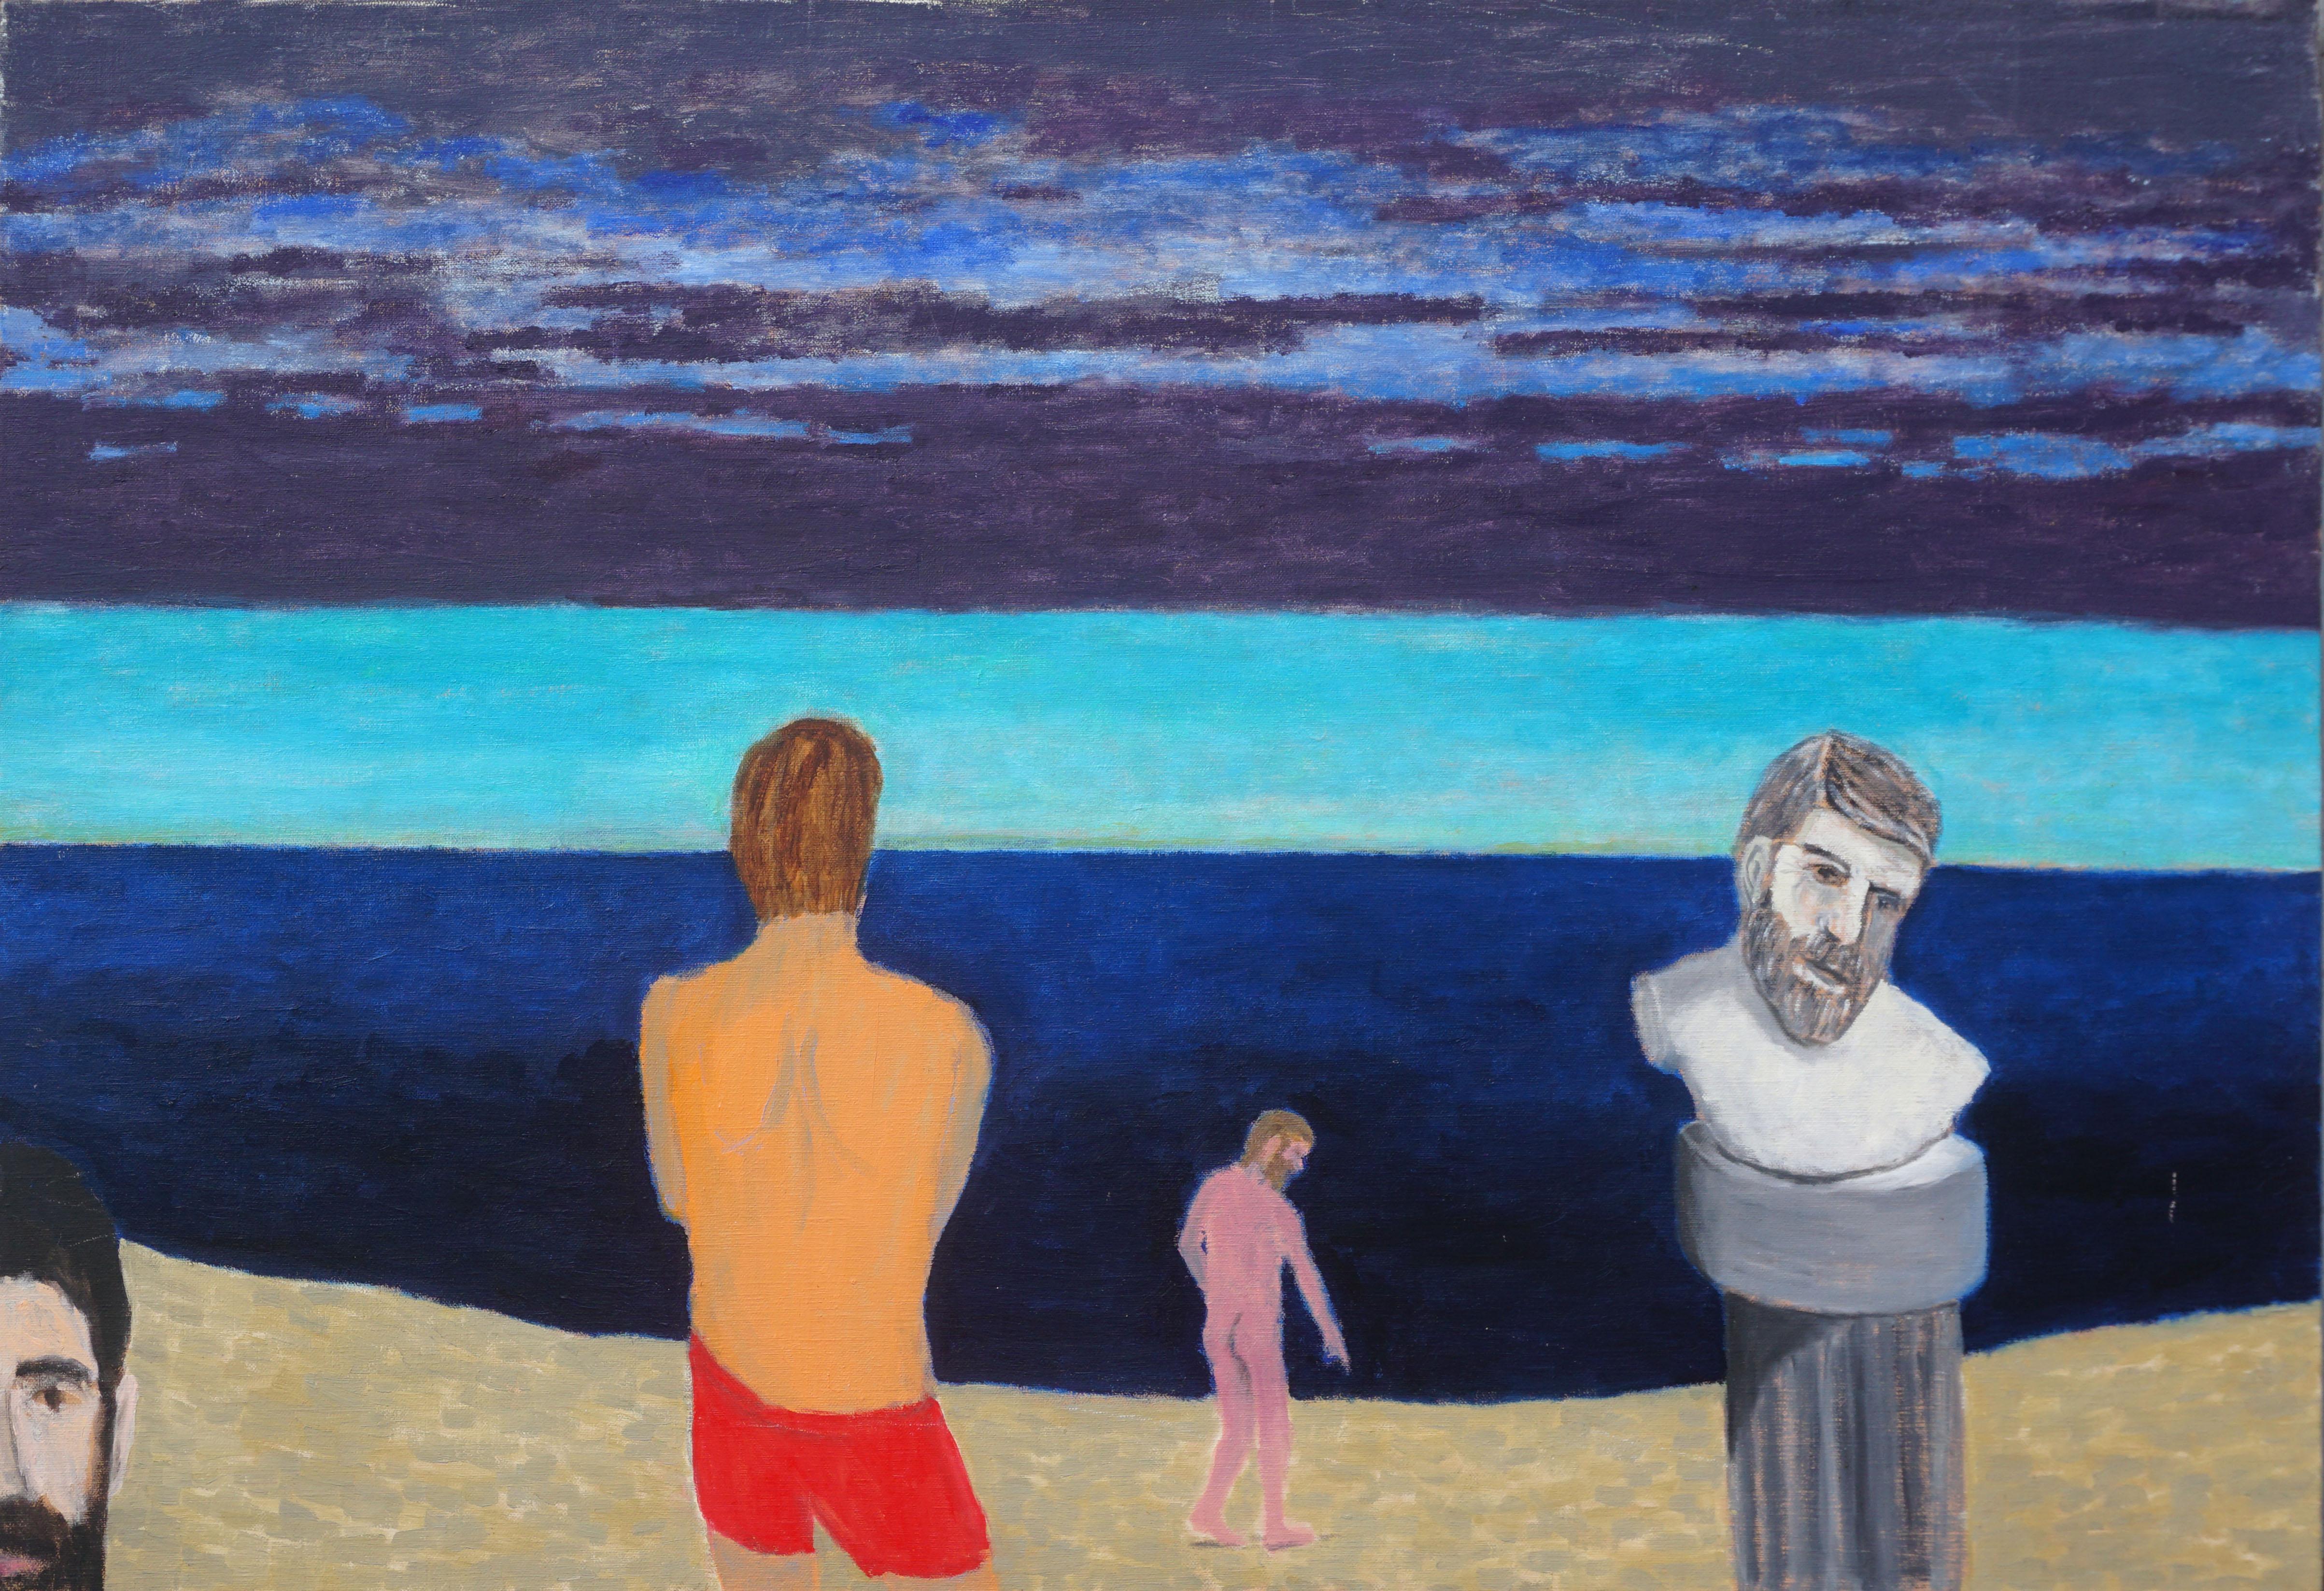 Michael Pauker  Figurative Painting - Figures on the Beach with Sculpture, Contemporary Surreal Figural Landscape